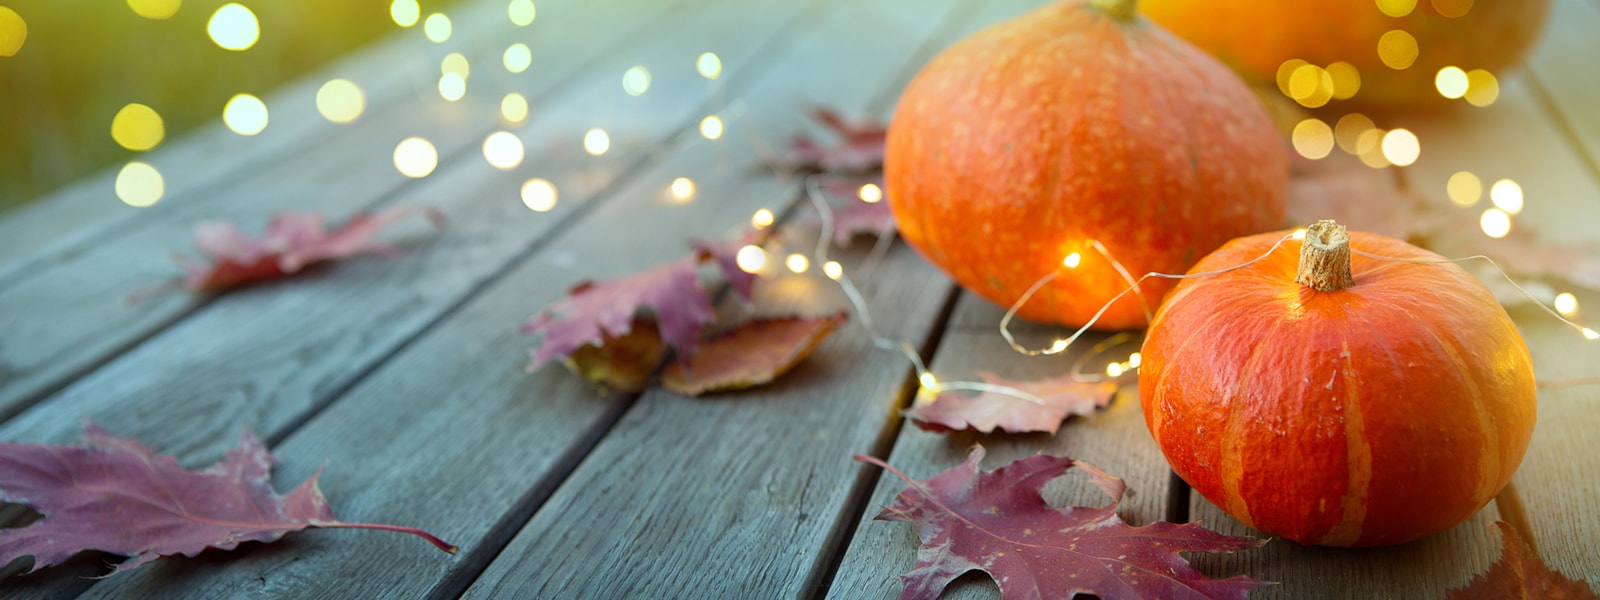 pumpkins, lights, and leaves on a table